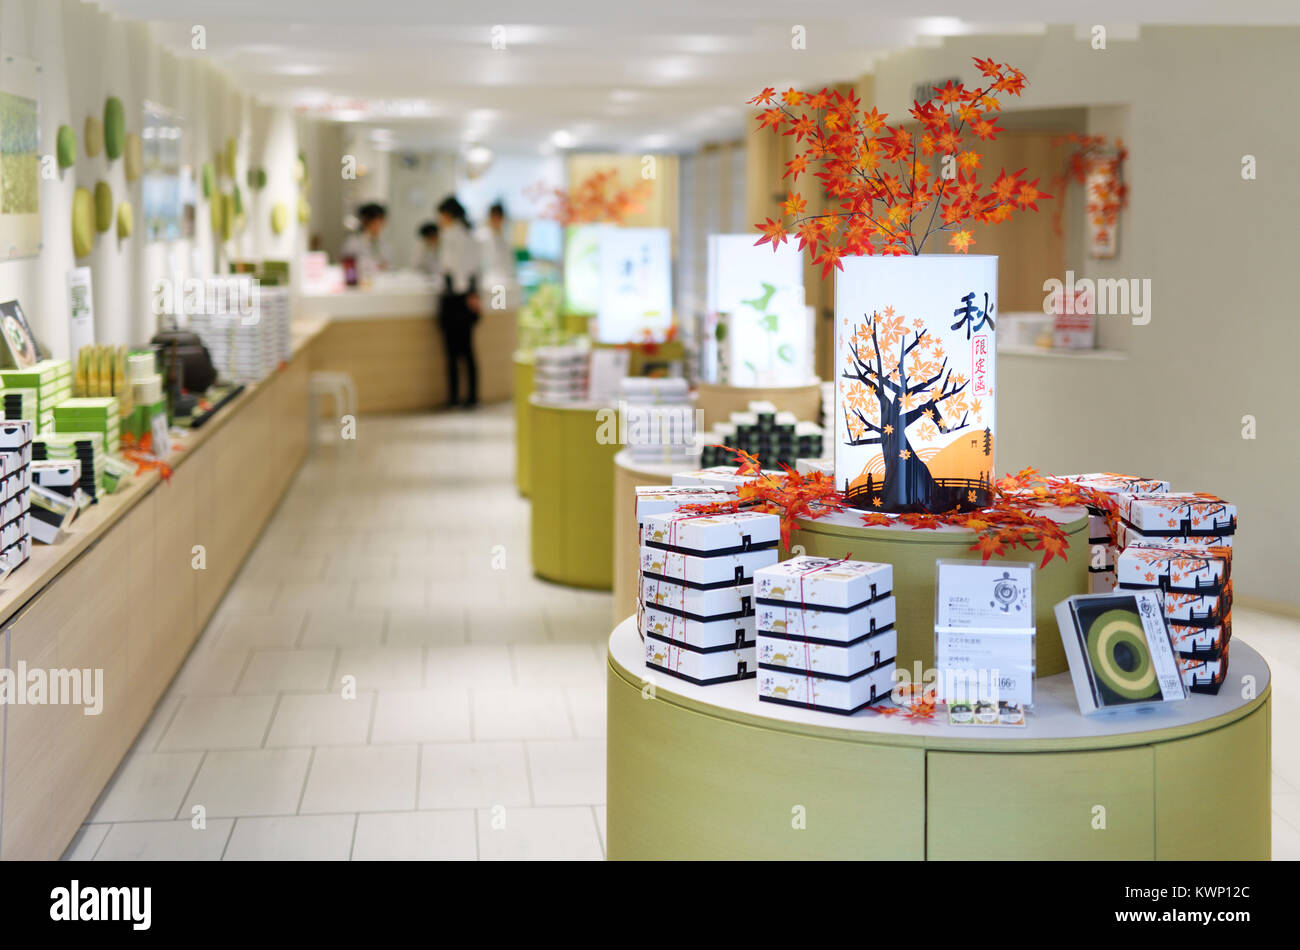 Store in Kyoto specializing in Kyo Baum, Japanese matcha and soy milk Baumkuchen, ring shaped rice cake souvenir dessert treats. Kyoto, Japan 2017. Stock Photo